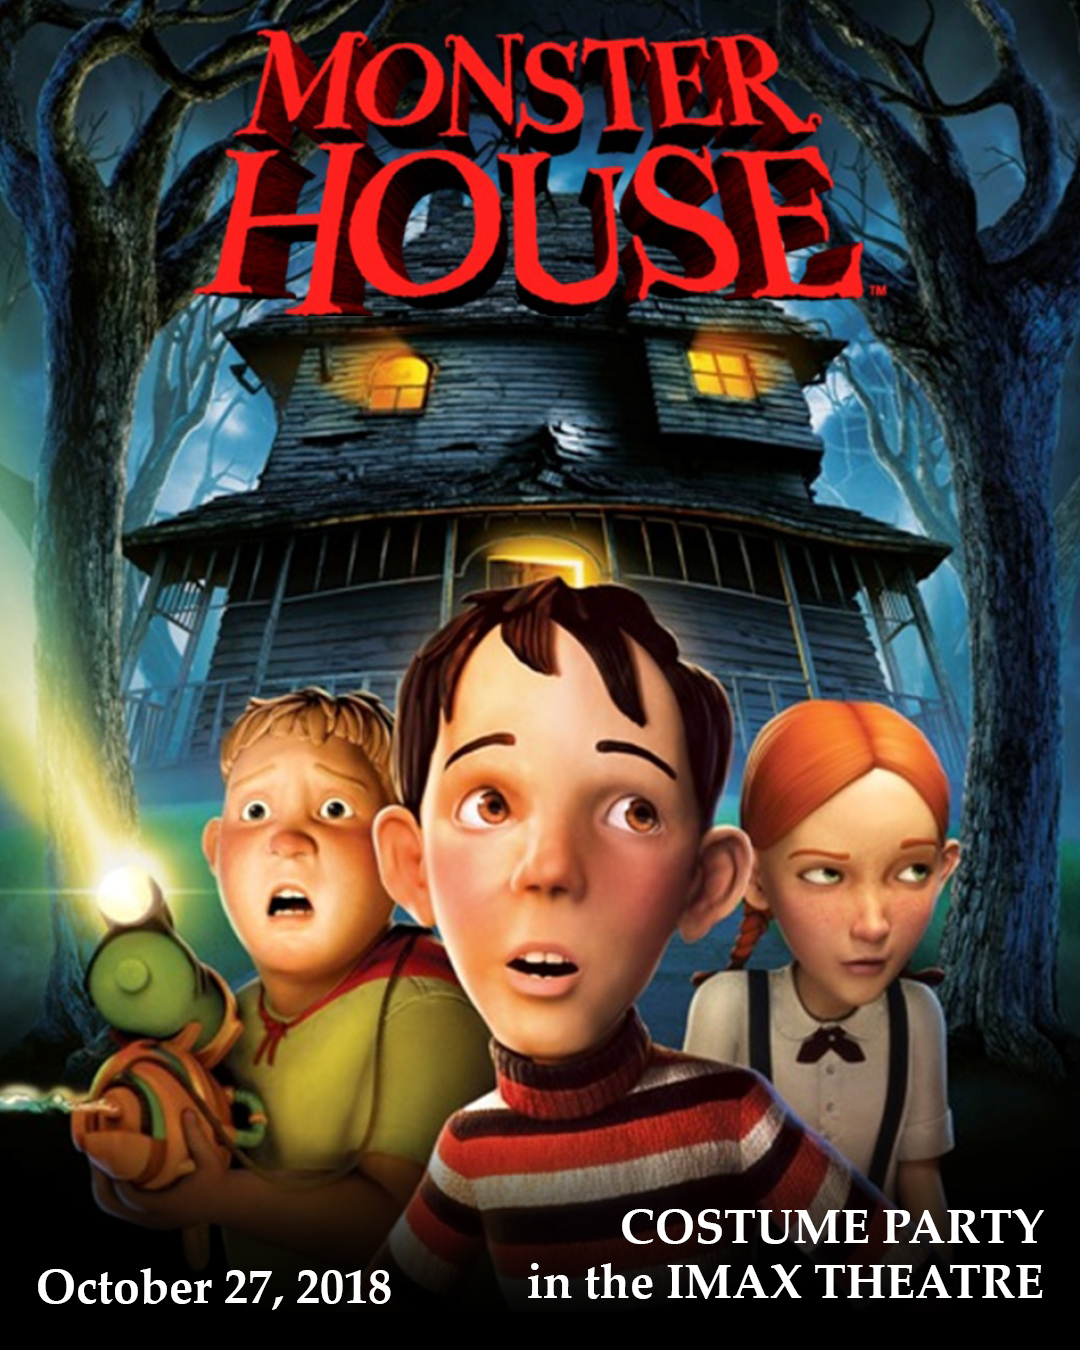 Monster House: Costume Party in the IMAX Theatre - image